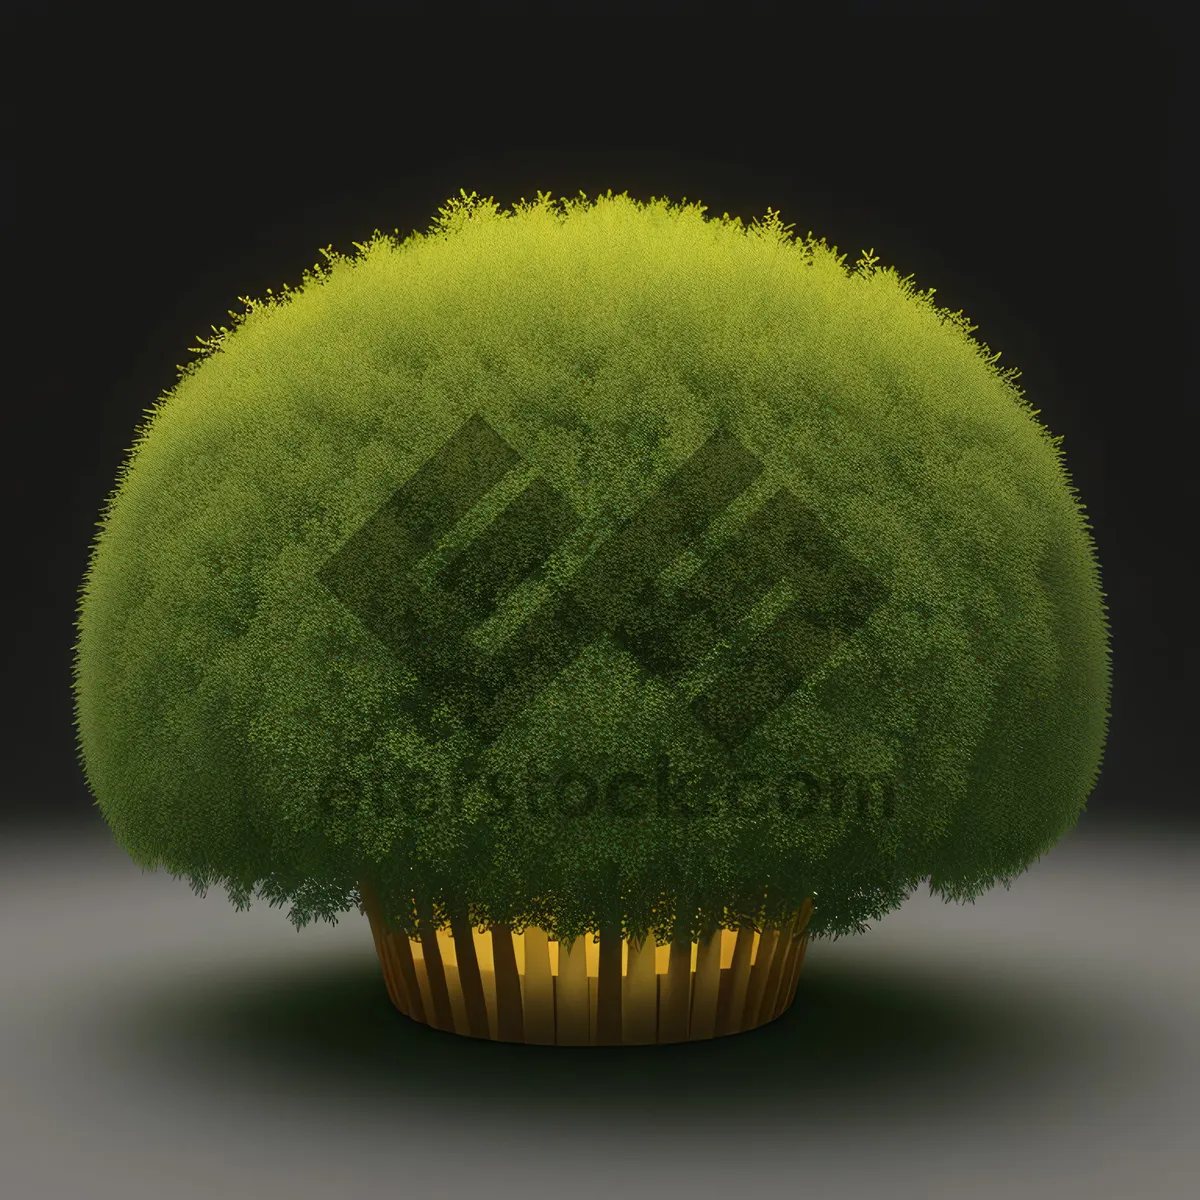 Picture of Yellow Tennis Ball on Court